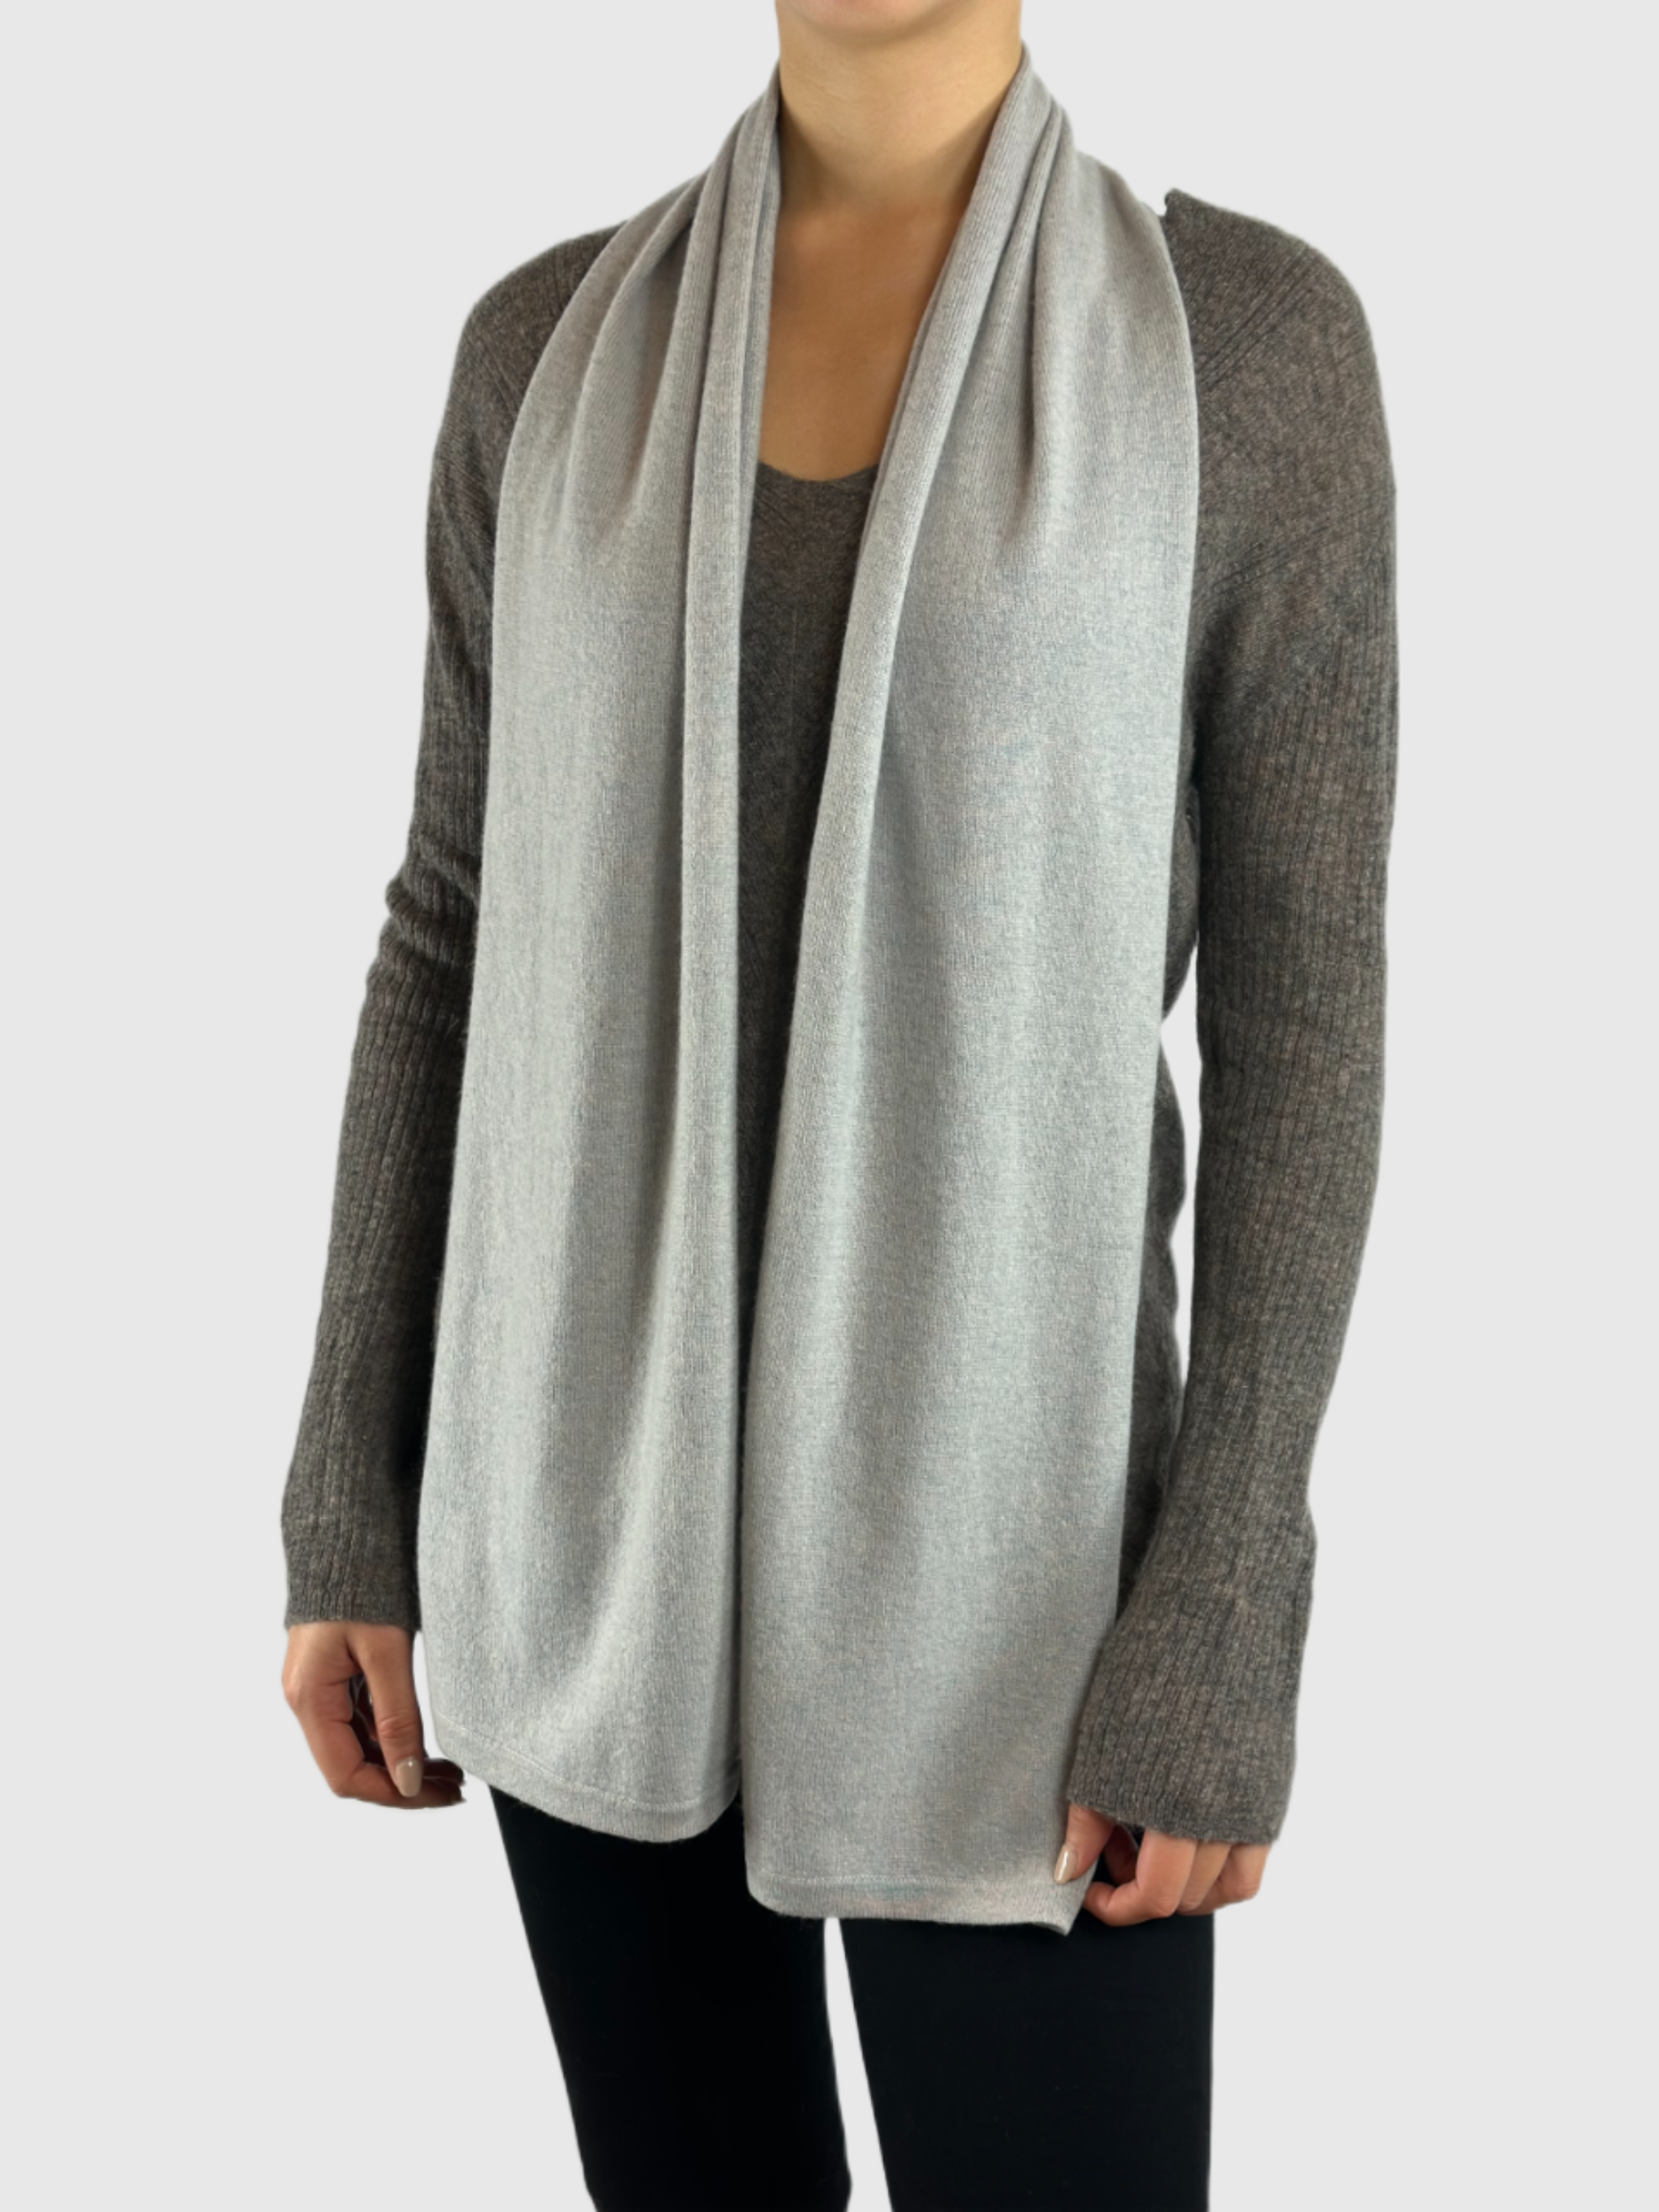 Luxurious Cashmere Scarf from Nepal